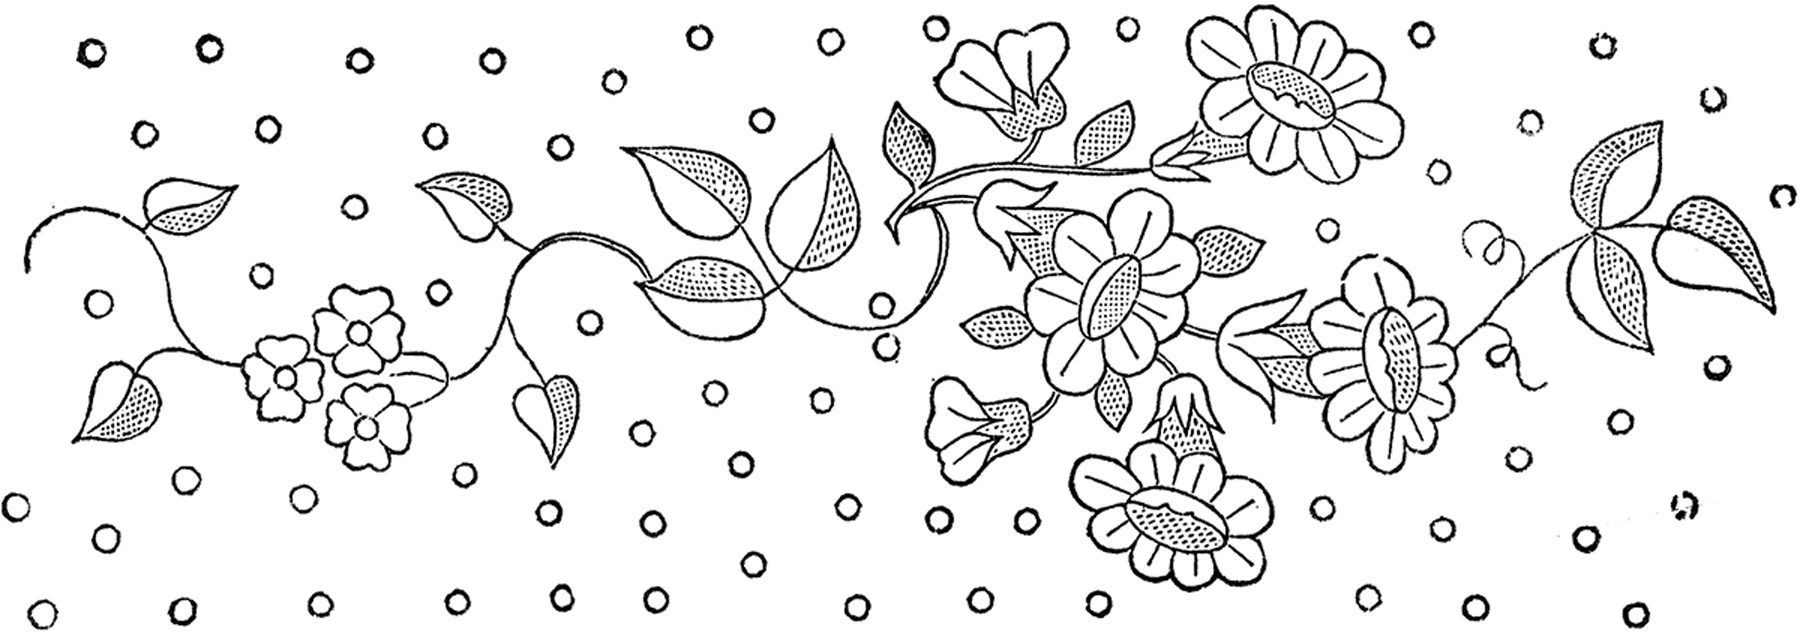 Bird Embroidery Patterns Free Floral Embroidery Patterns Pretty The Graphics Fairy